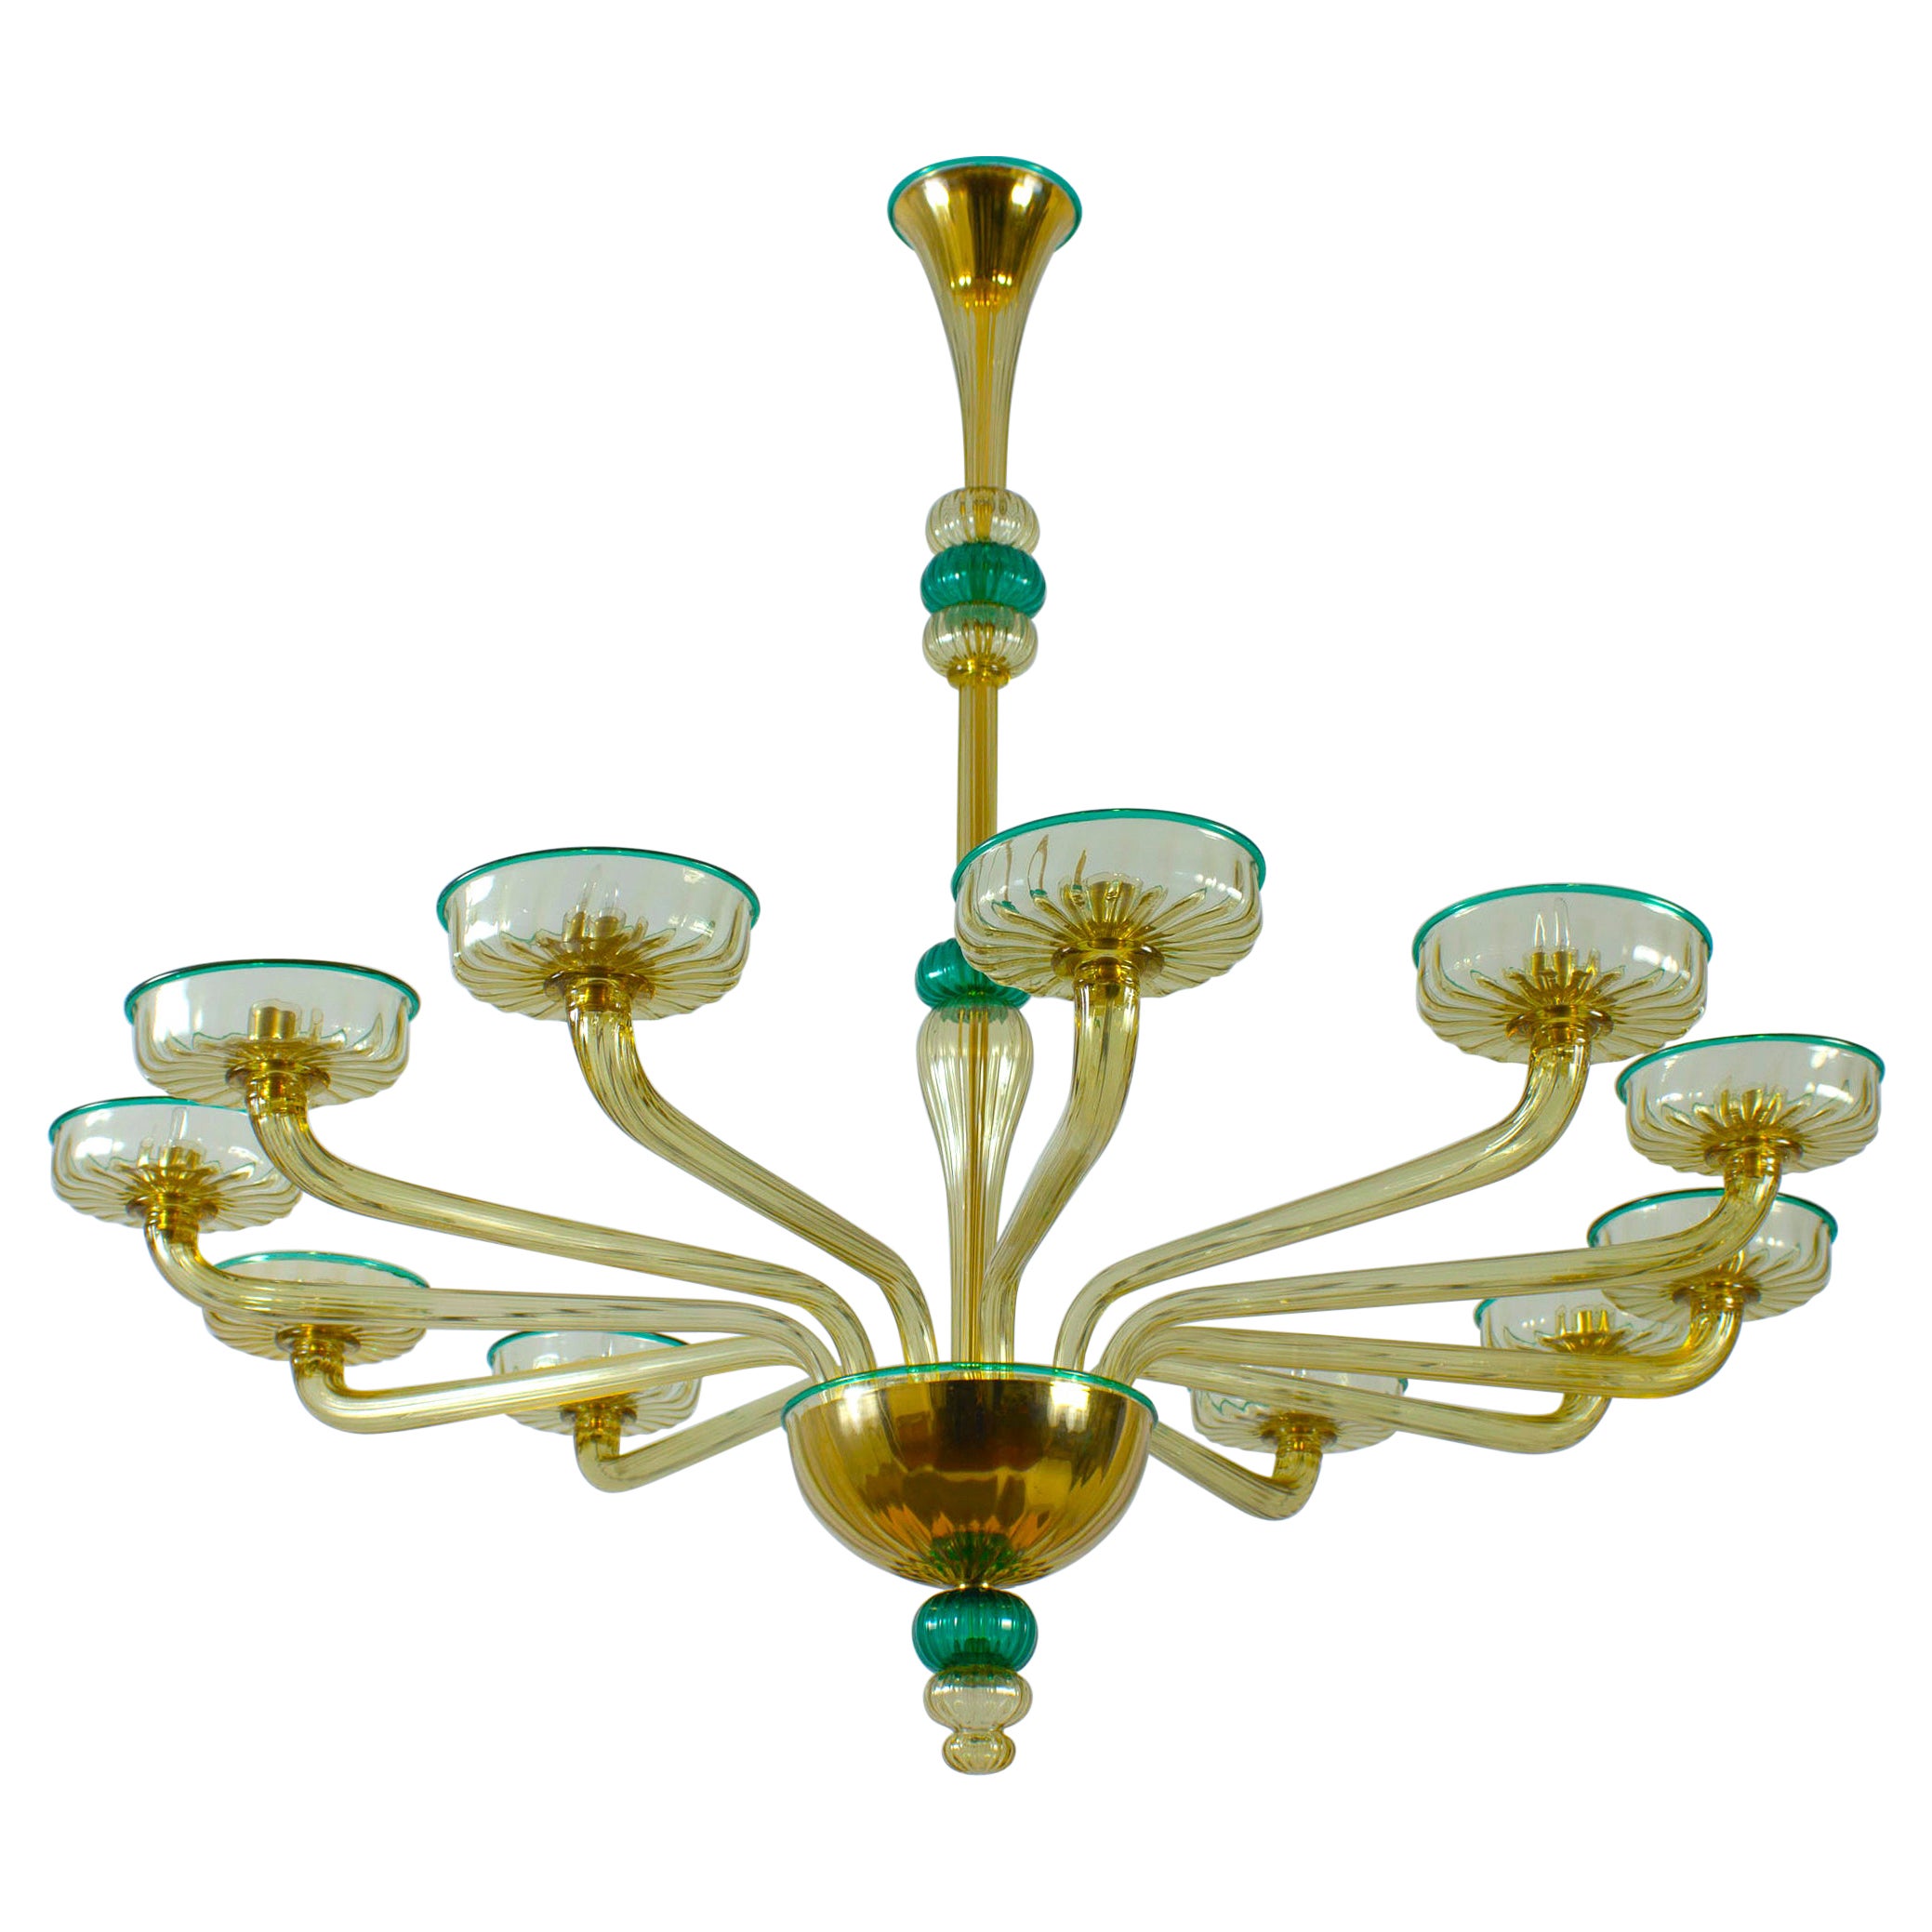 Chandelier Amber and Emerald Hand Blown Glass, attributed to Venini, circa 1970s